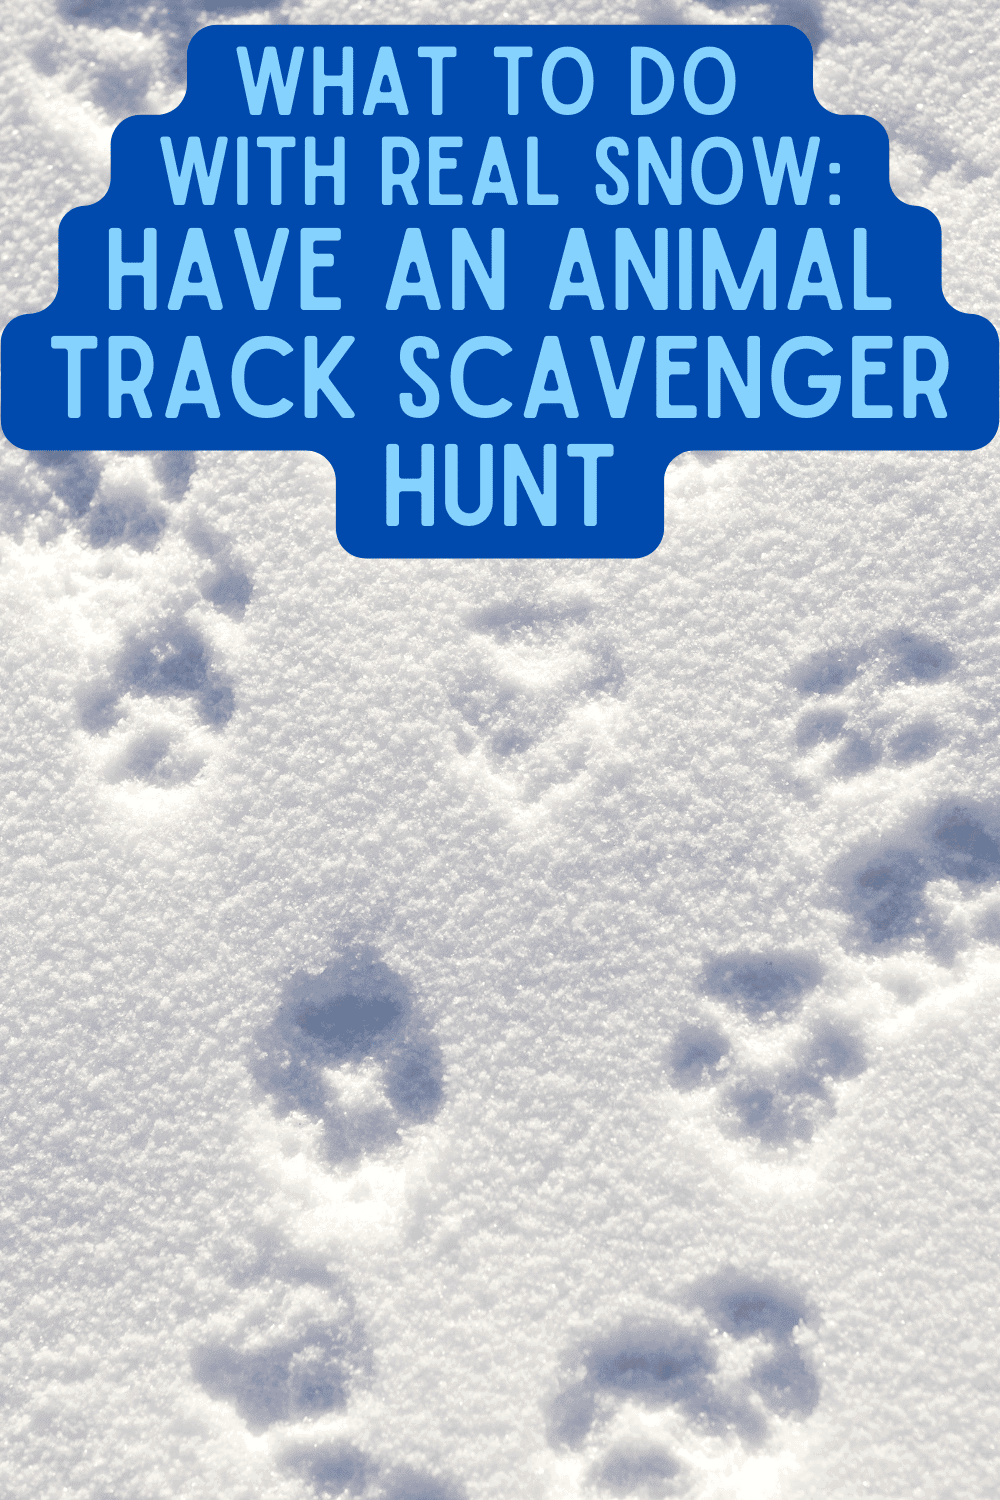 what to make with real snow - animal track scavenger hunt text over image of animal tracks in snow